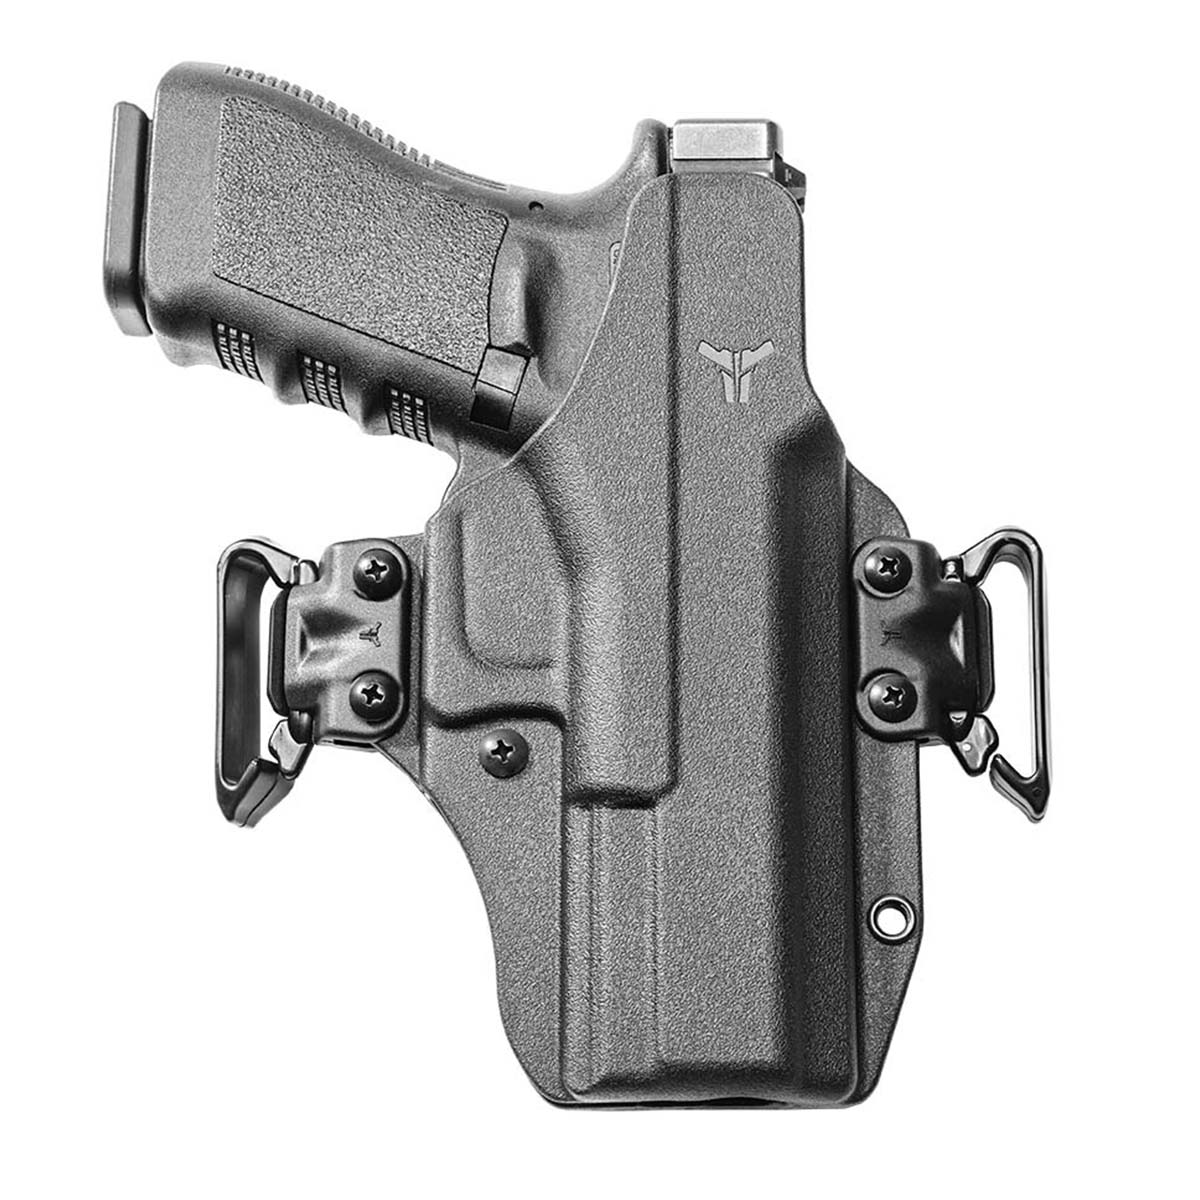 Guide to Drop Leg Holsters